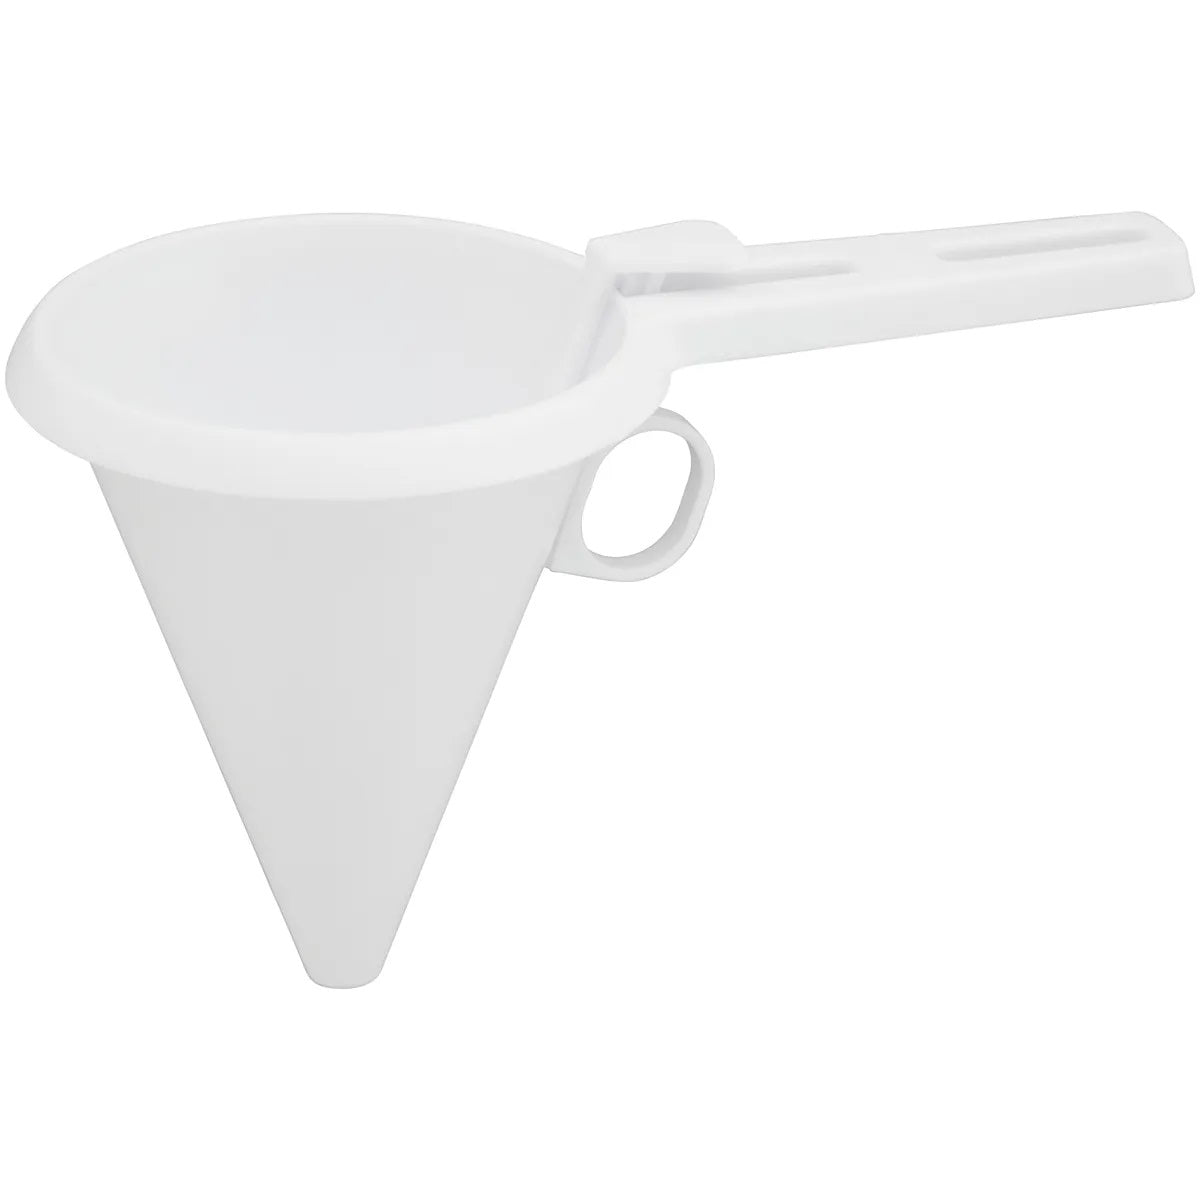 Wilton Easy Pour Candy Funnel